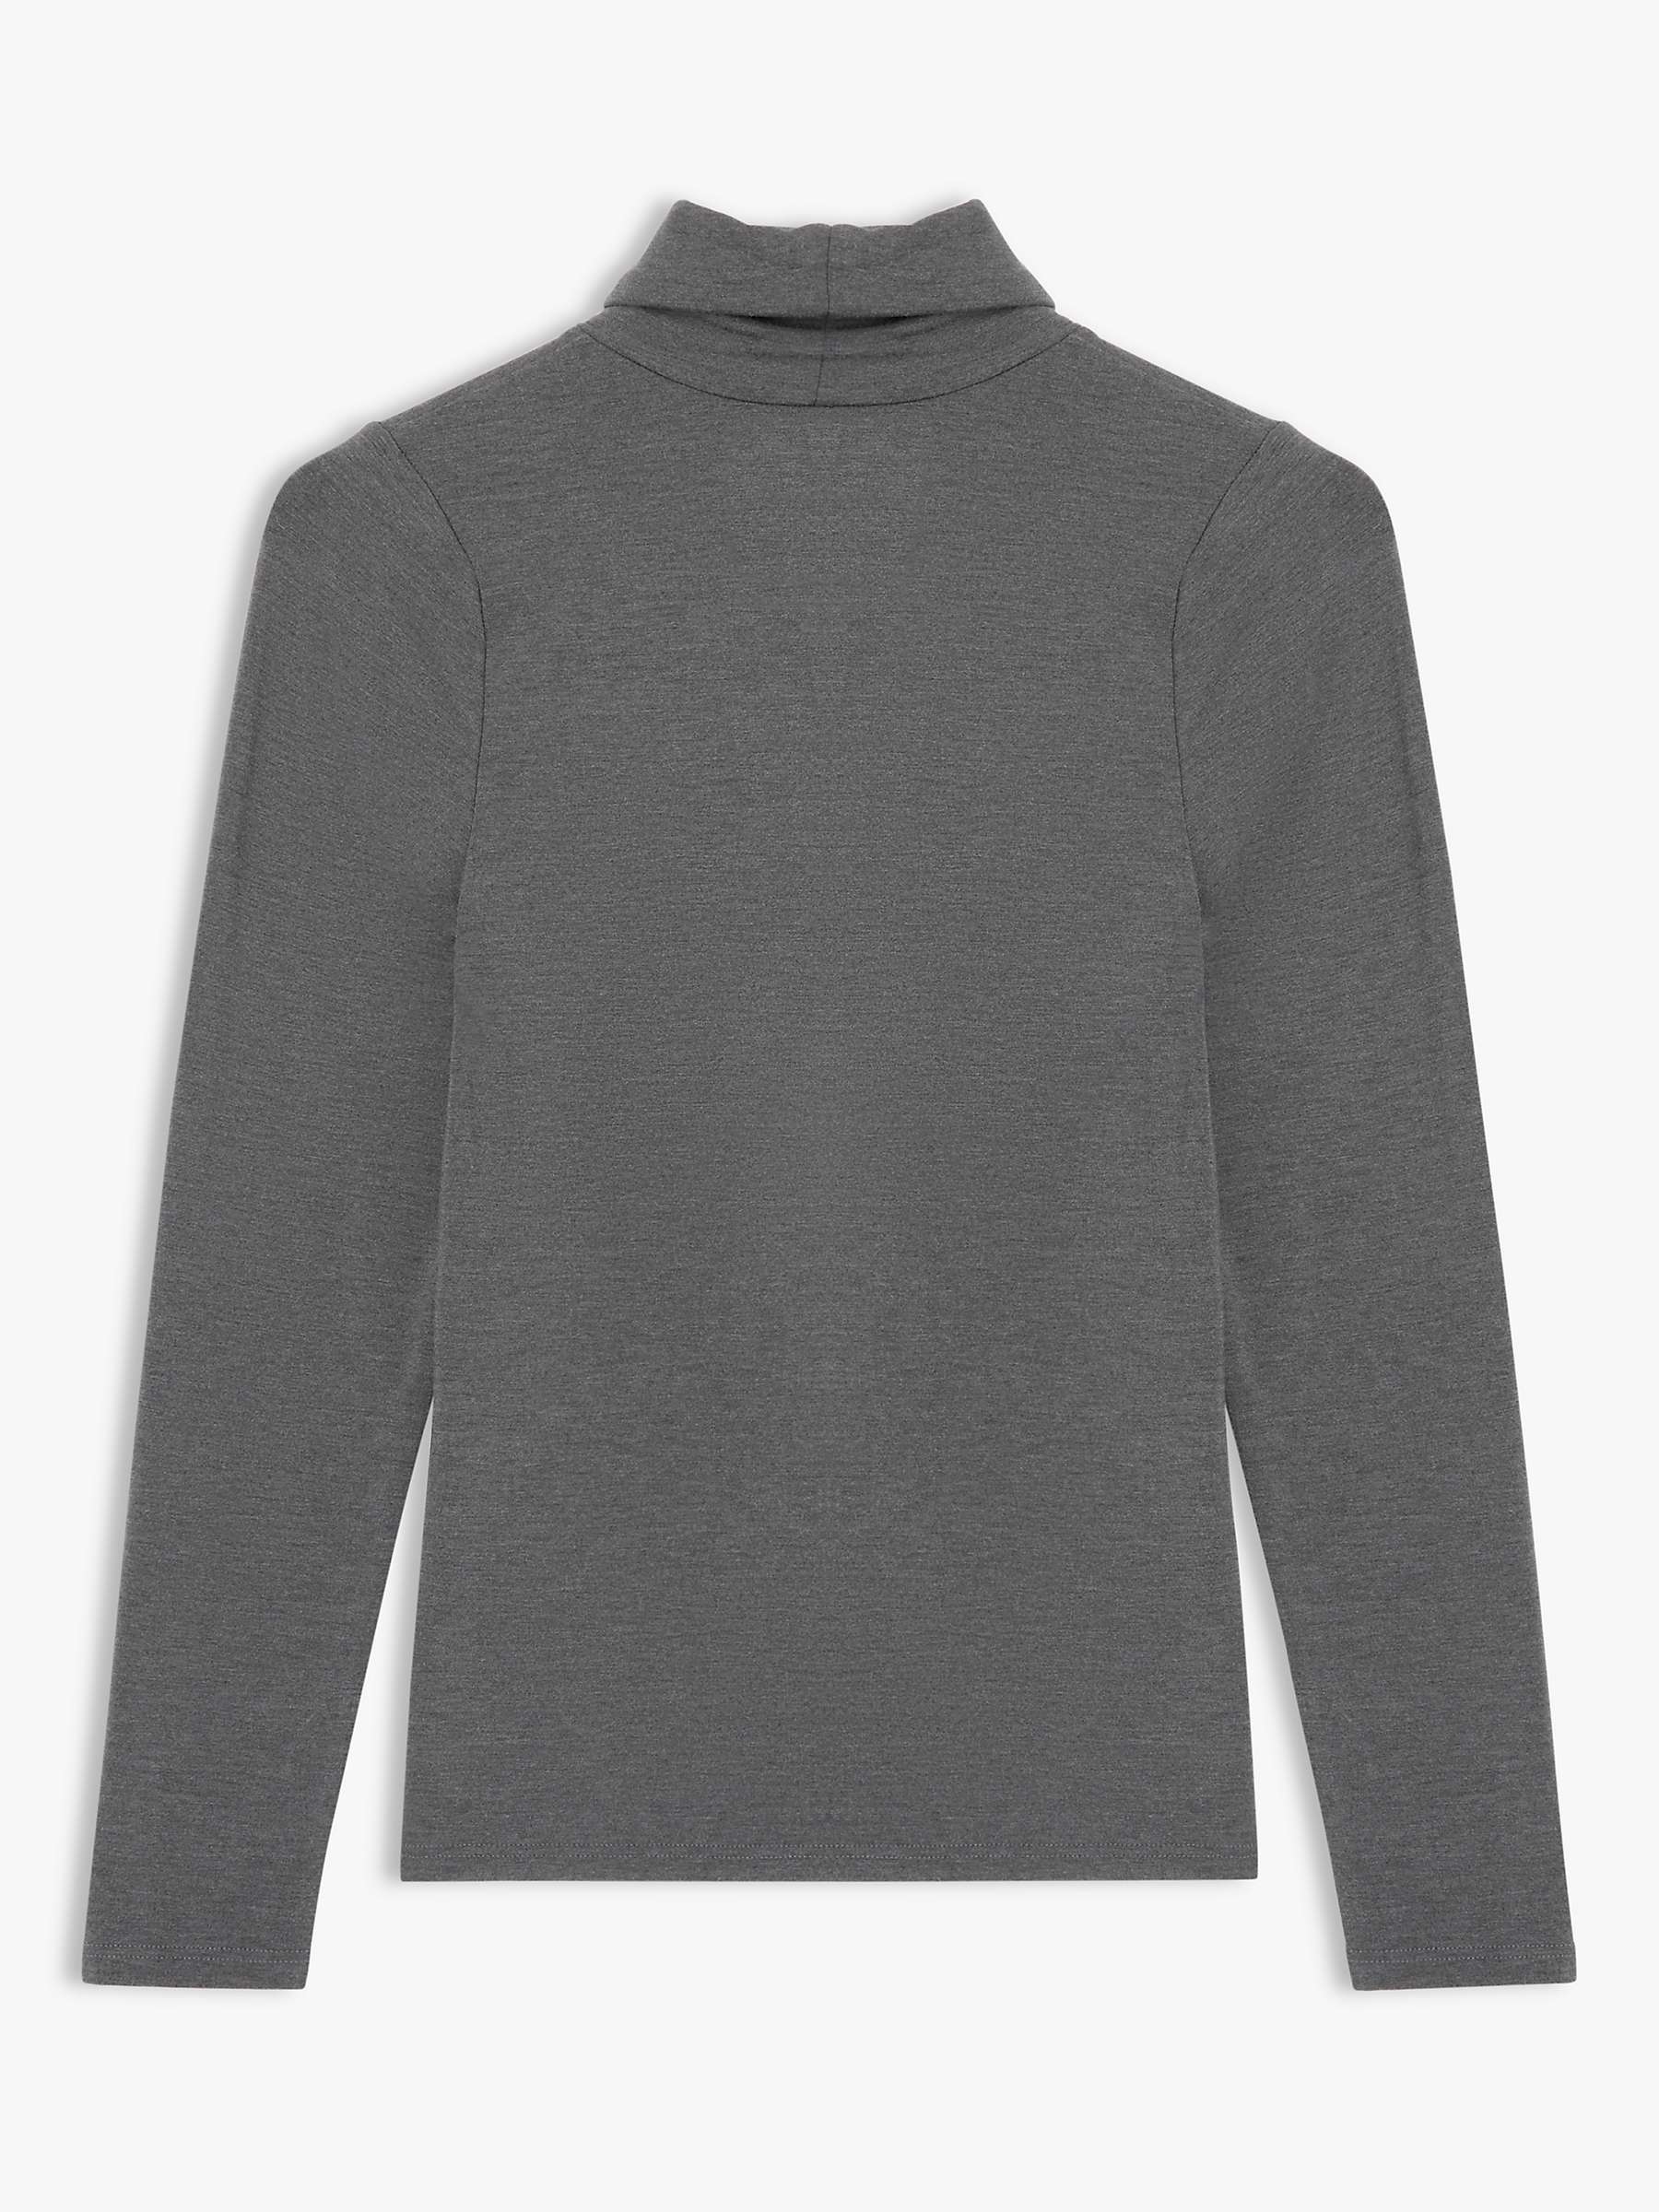 Buy John Lewis Micro Warmth Thermal Roll Neck, Charcoal Online at johnlewis.com